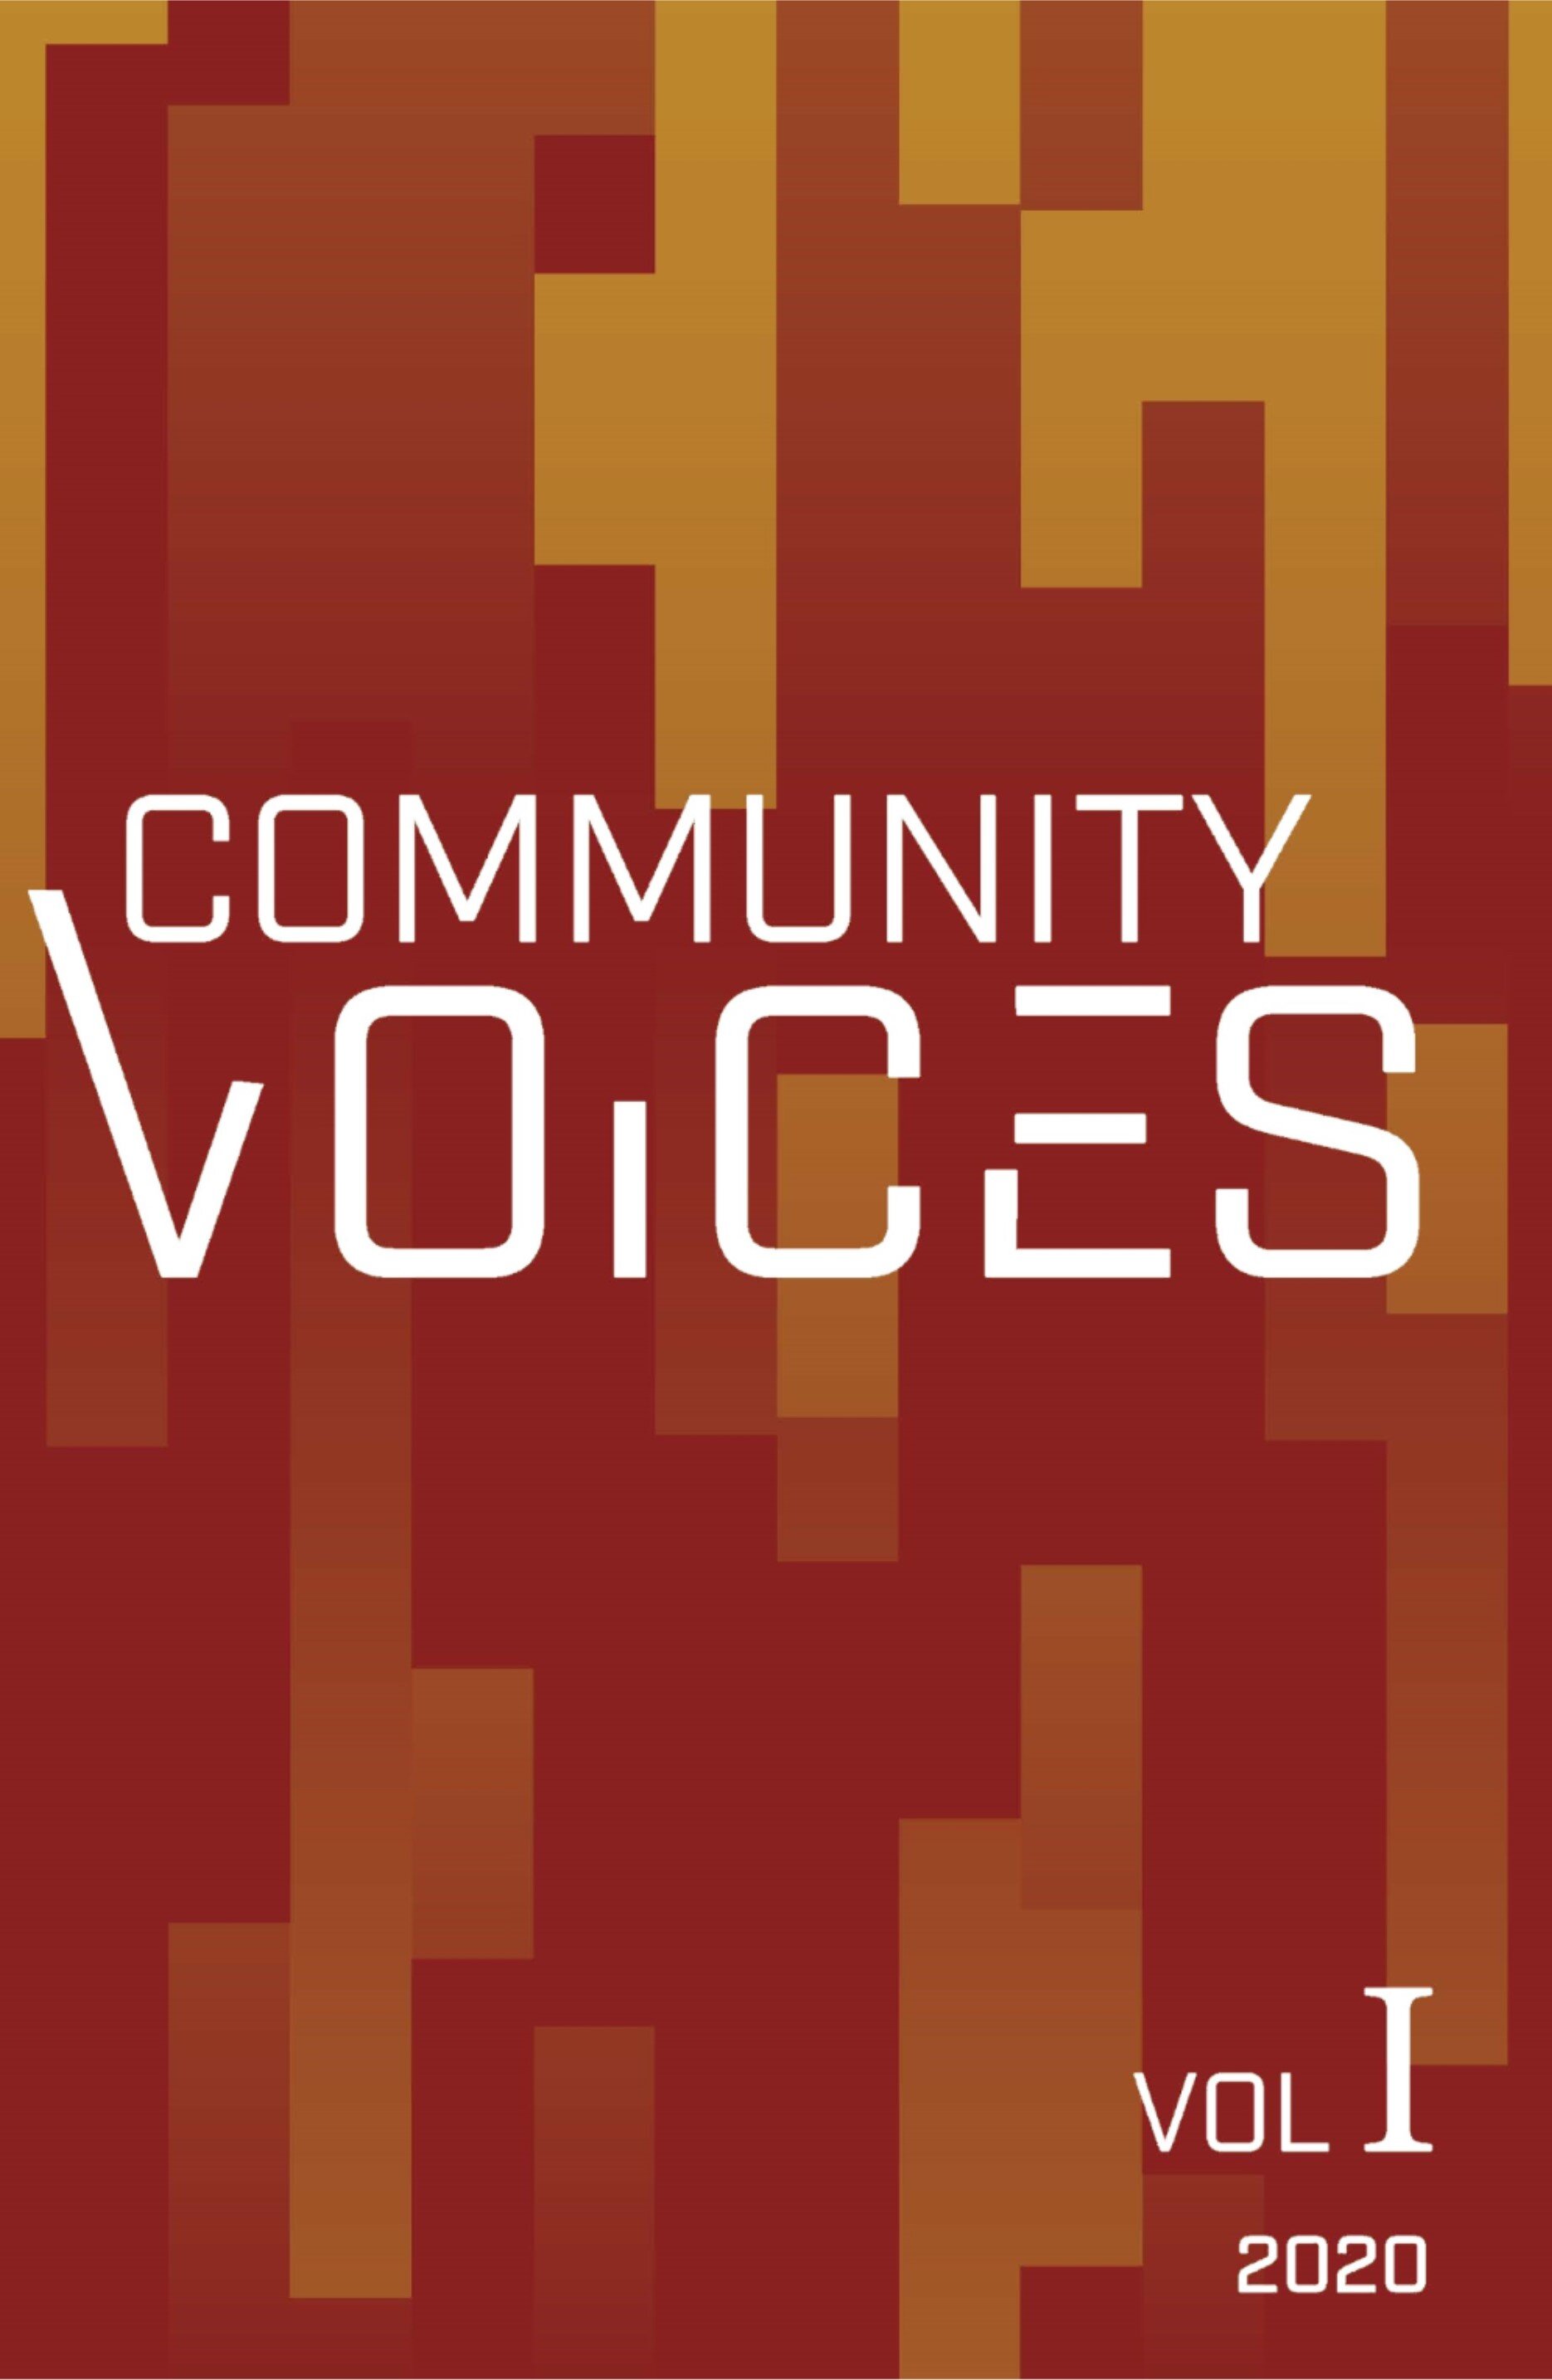 Community Voices, Volume 1 from Woodneath Press